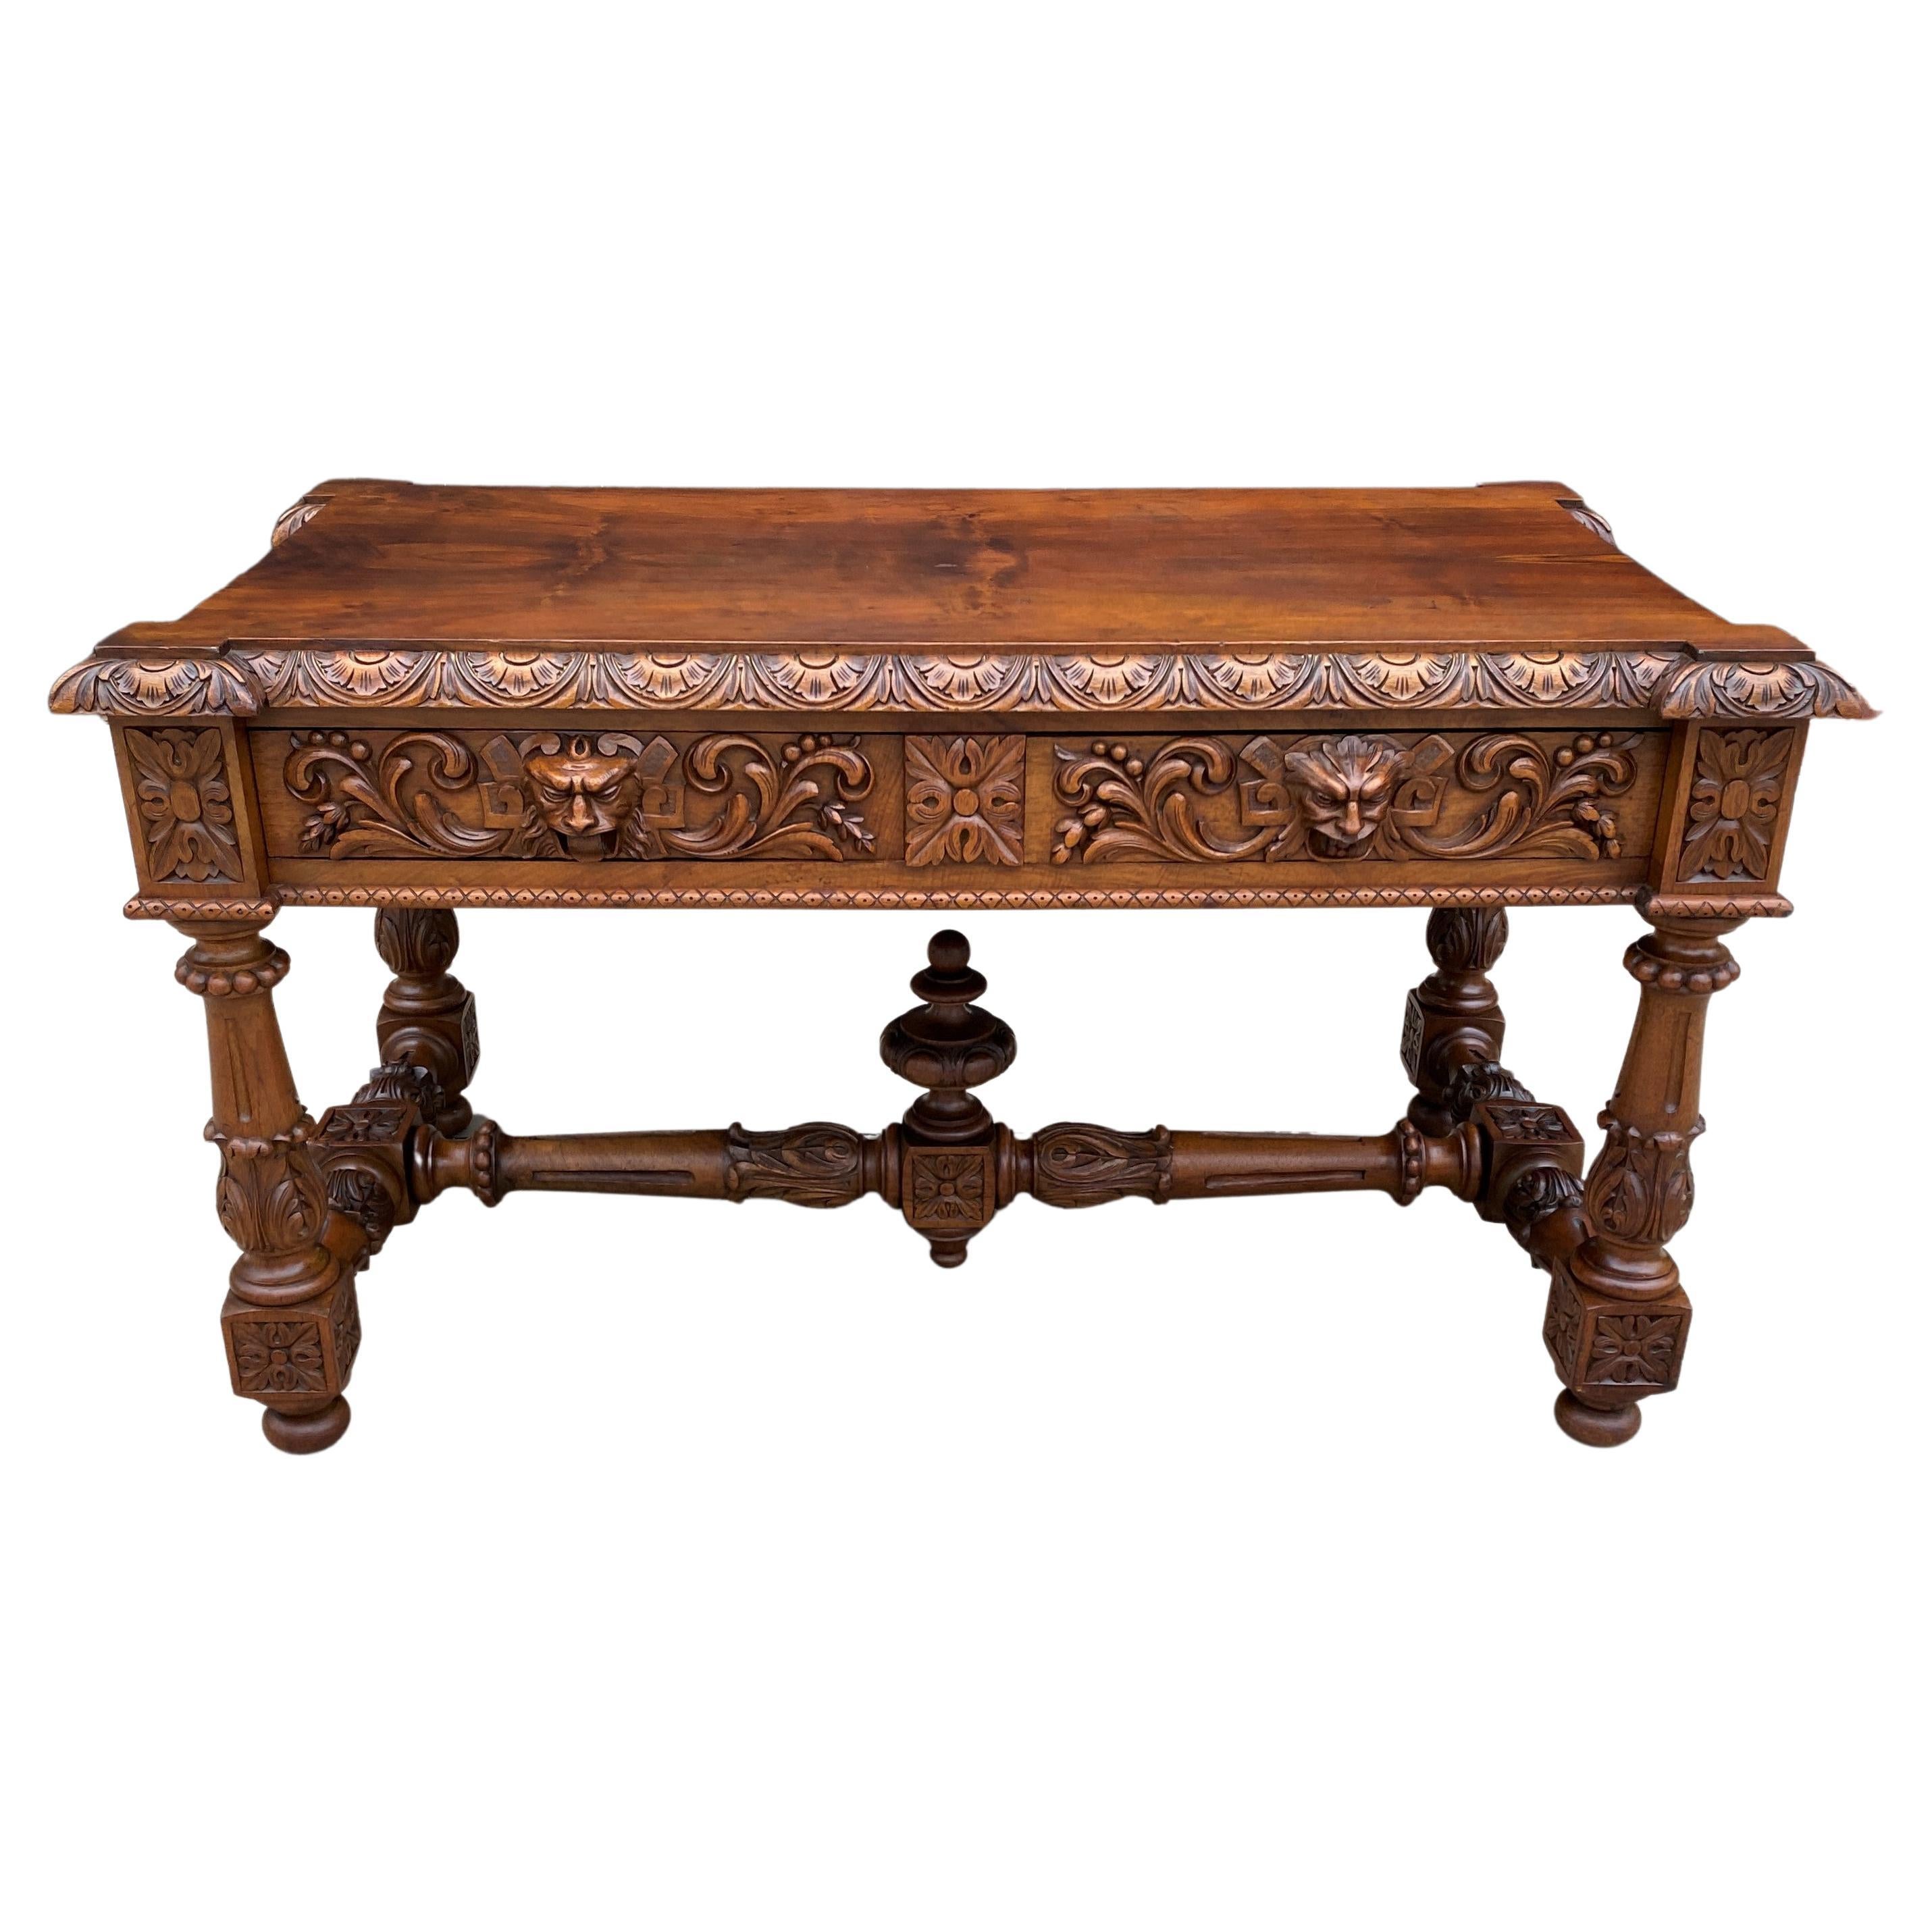 Antique French Partners Desk Writing Table Walnut Renaissance Conference